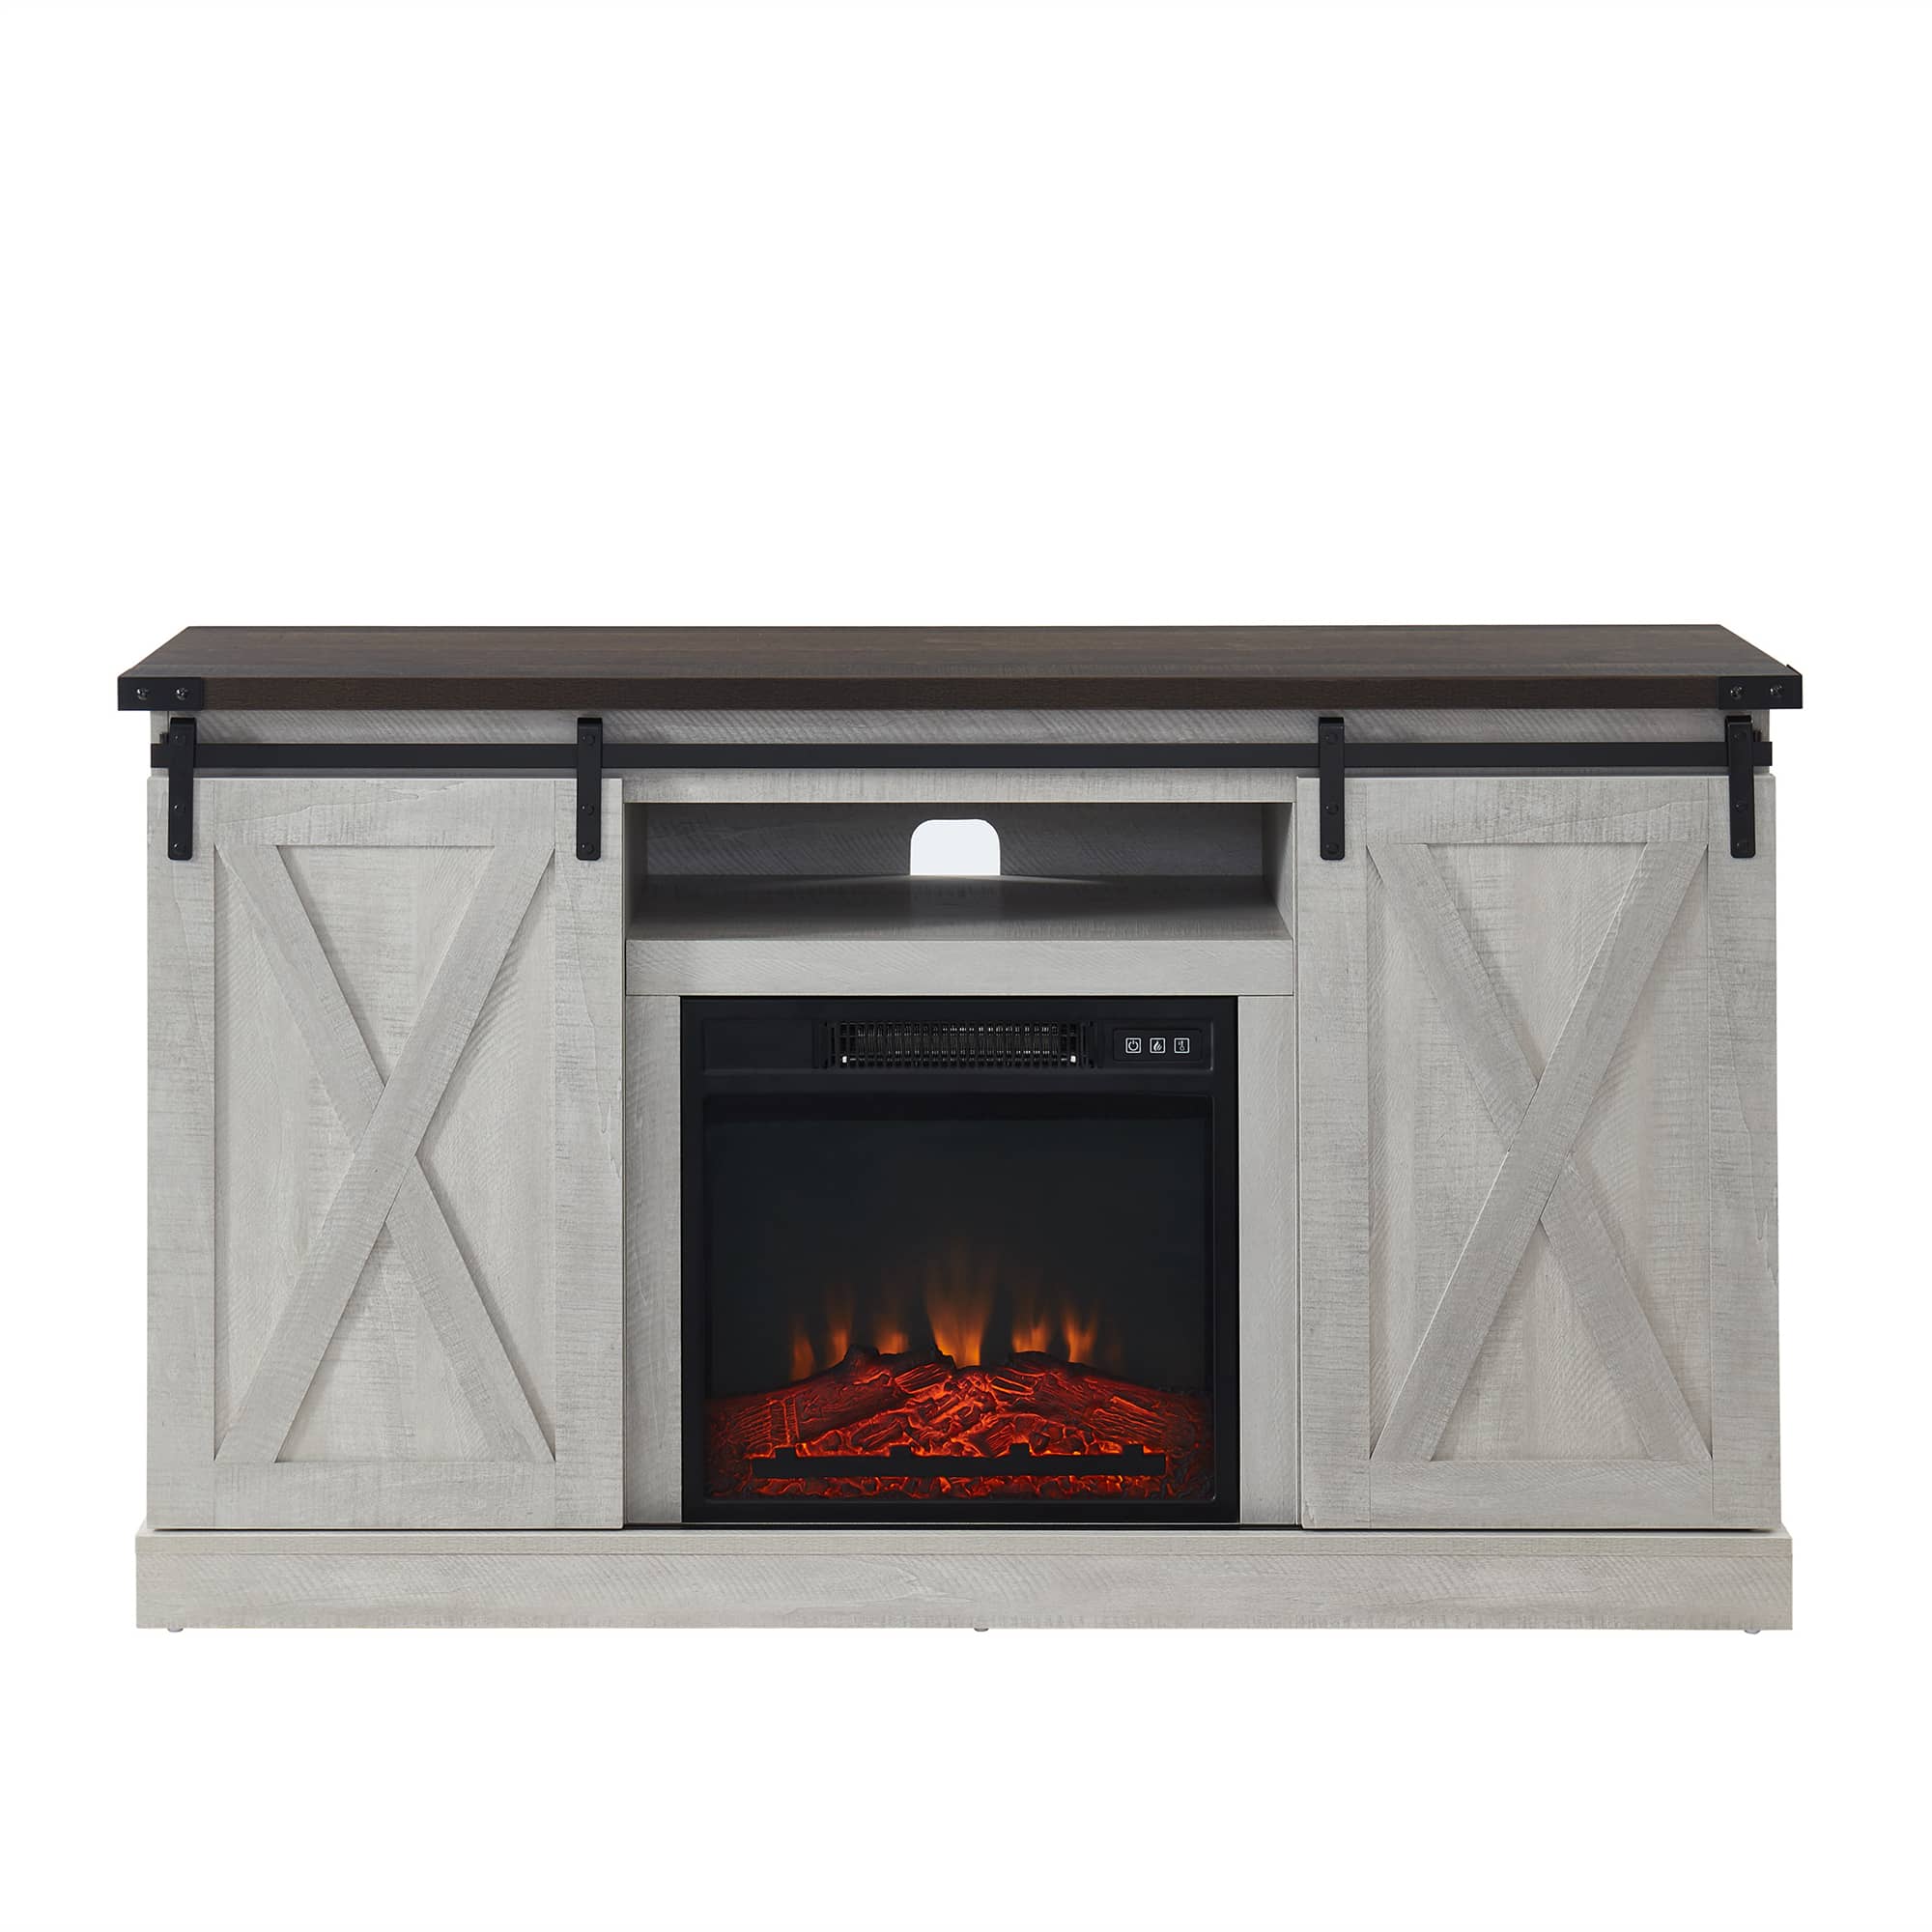 CASAINC 54 in. W Freestanding Wooden Storage Electric Fireplace TV Stand with Sliding Barn Door